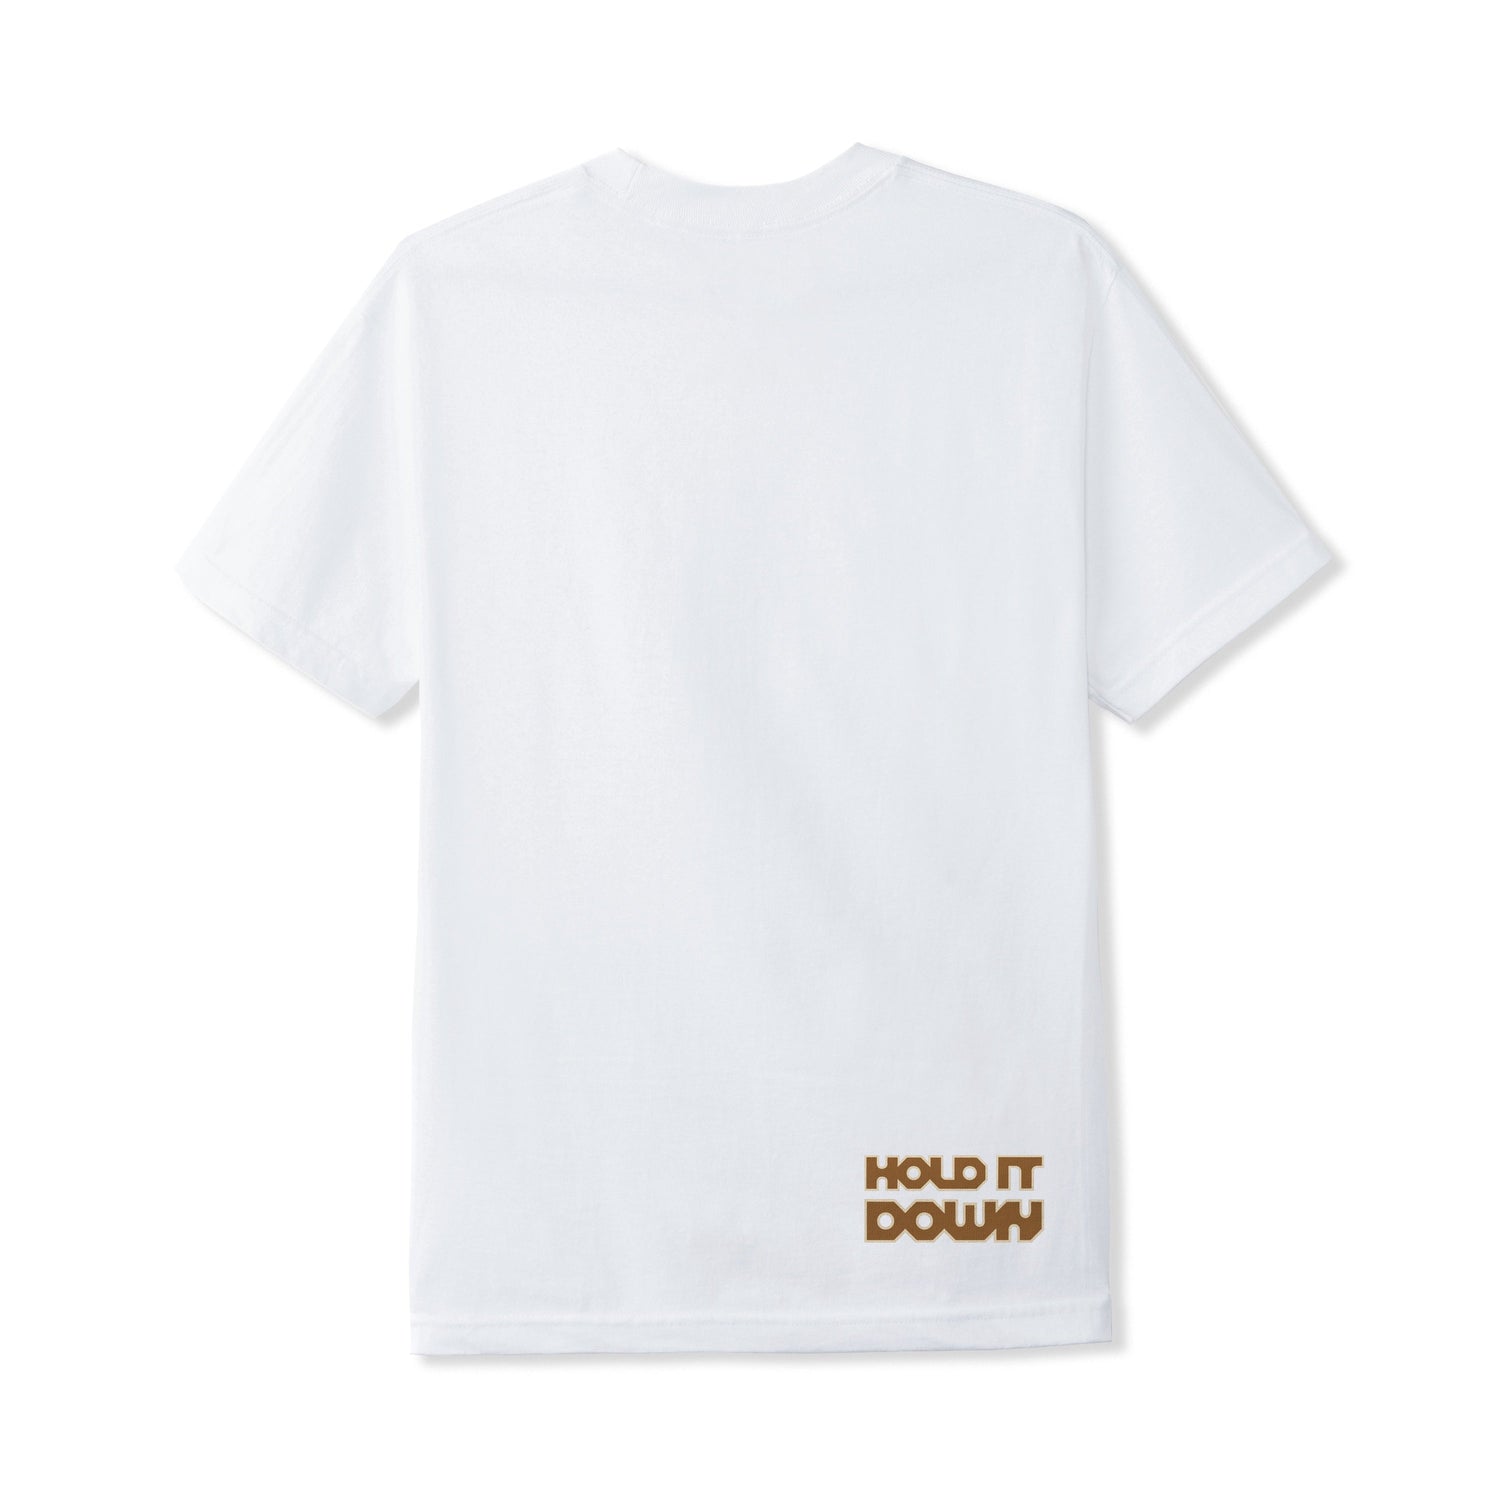 Hold It Down Tee, White